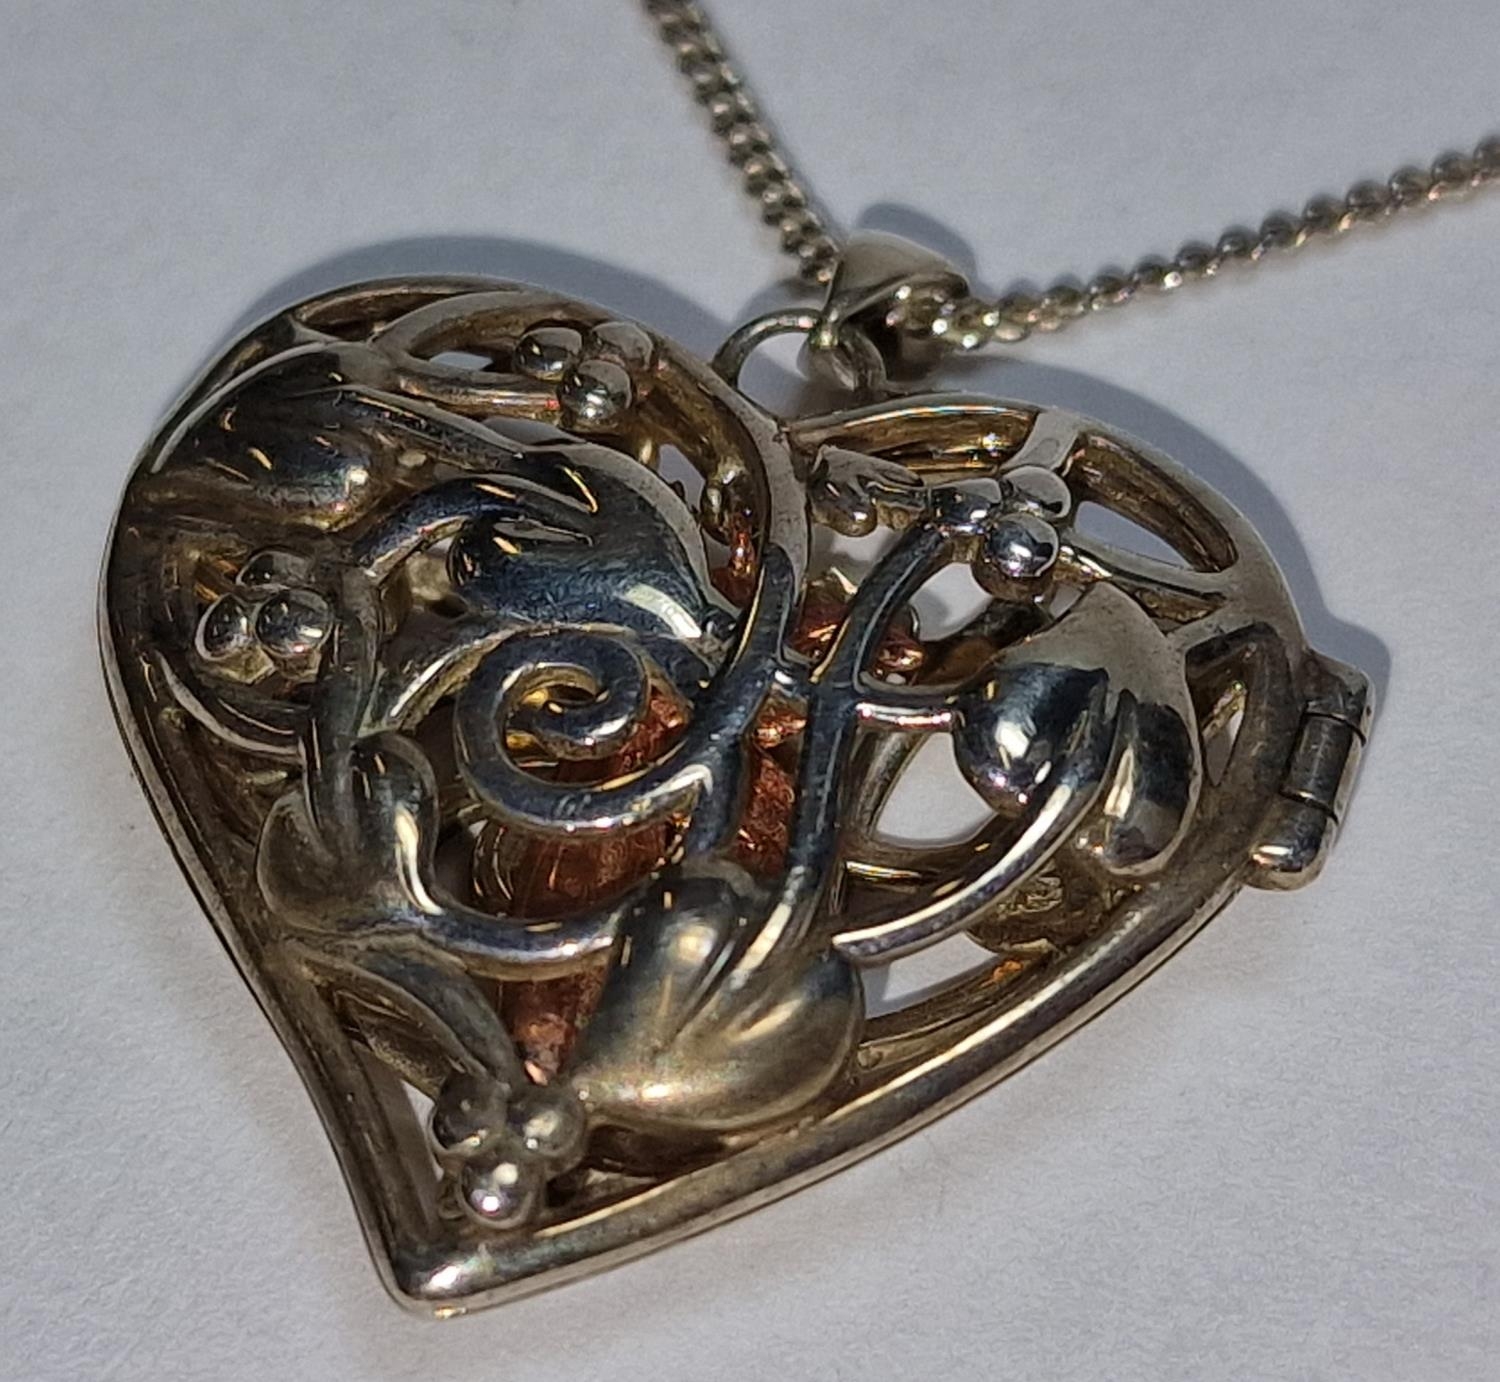 Clogau Welsh gold angel inside silver locket and chain. - Image 2 of 4